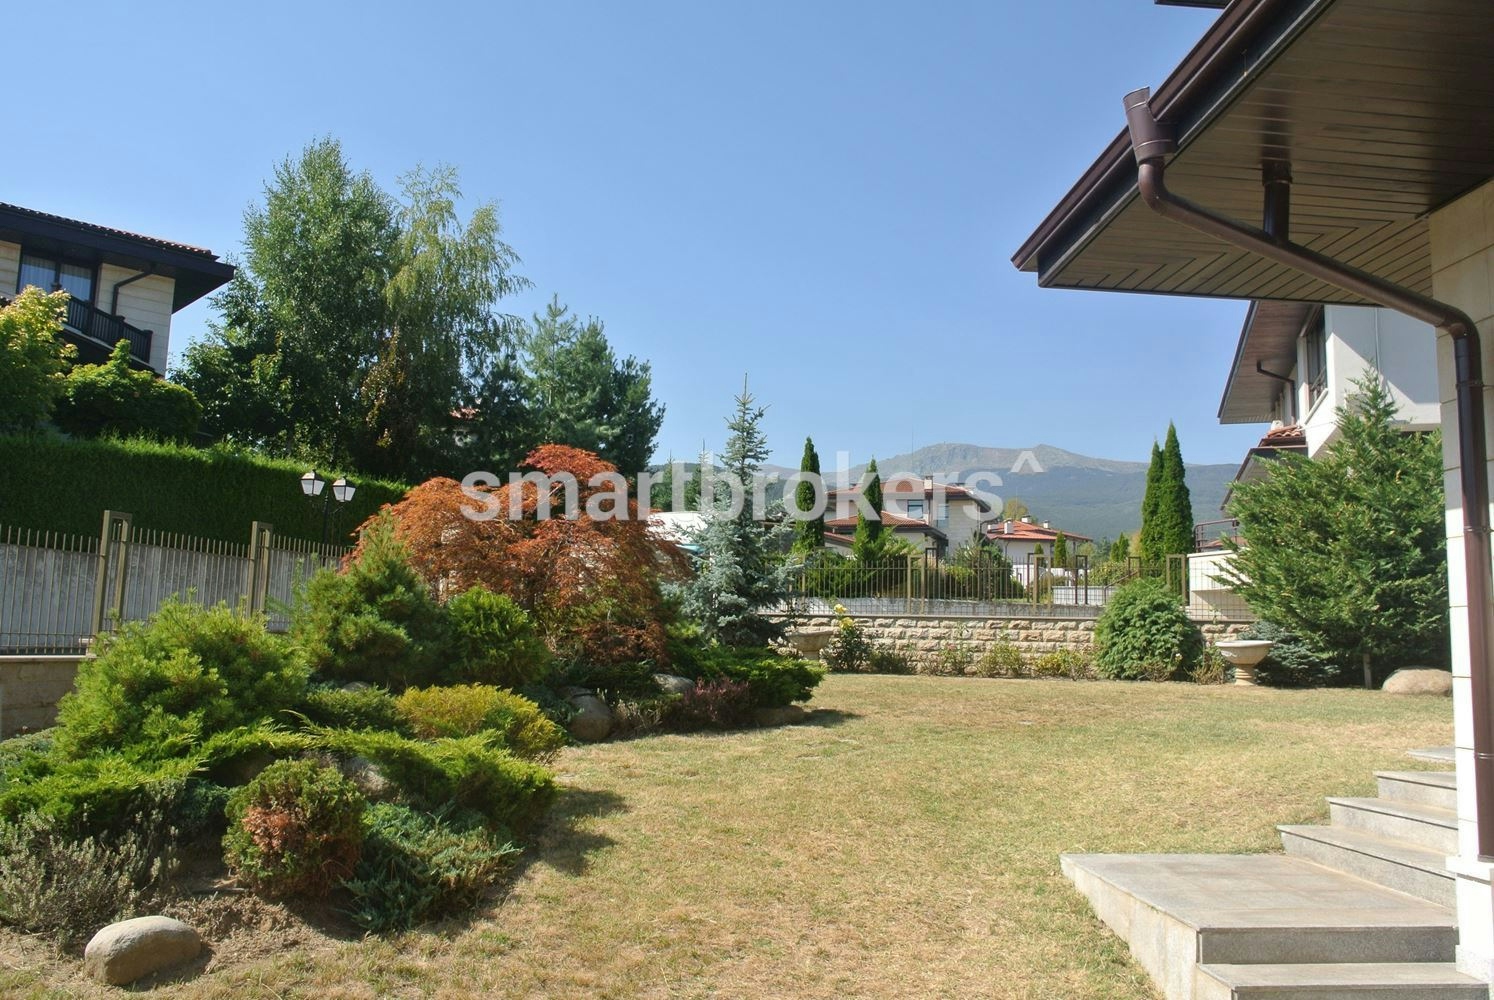 Luxury house with well maintained landscaped yard for rent in gated complex "Bel Valley"